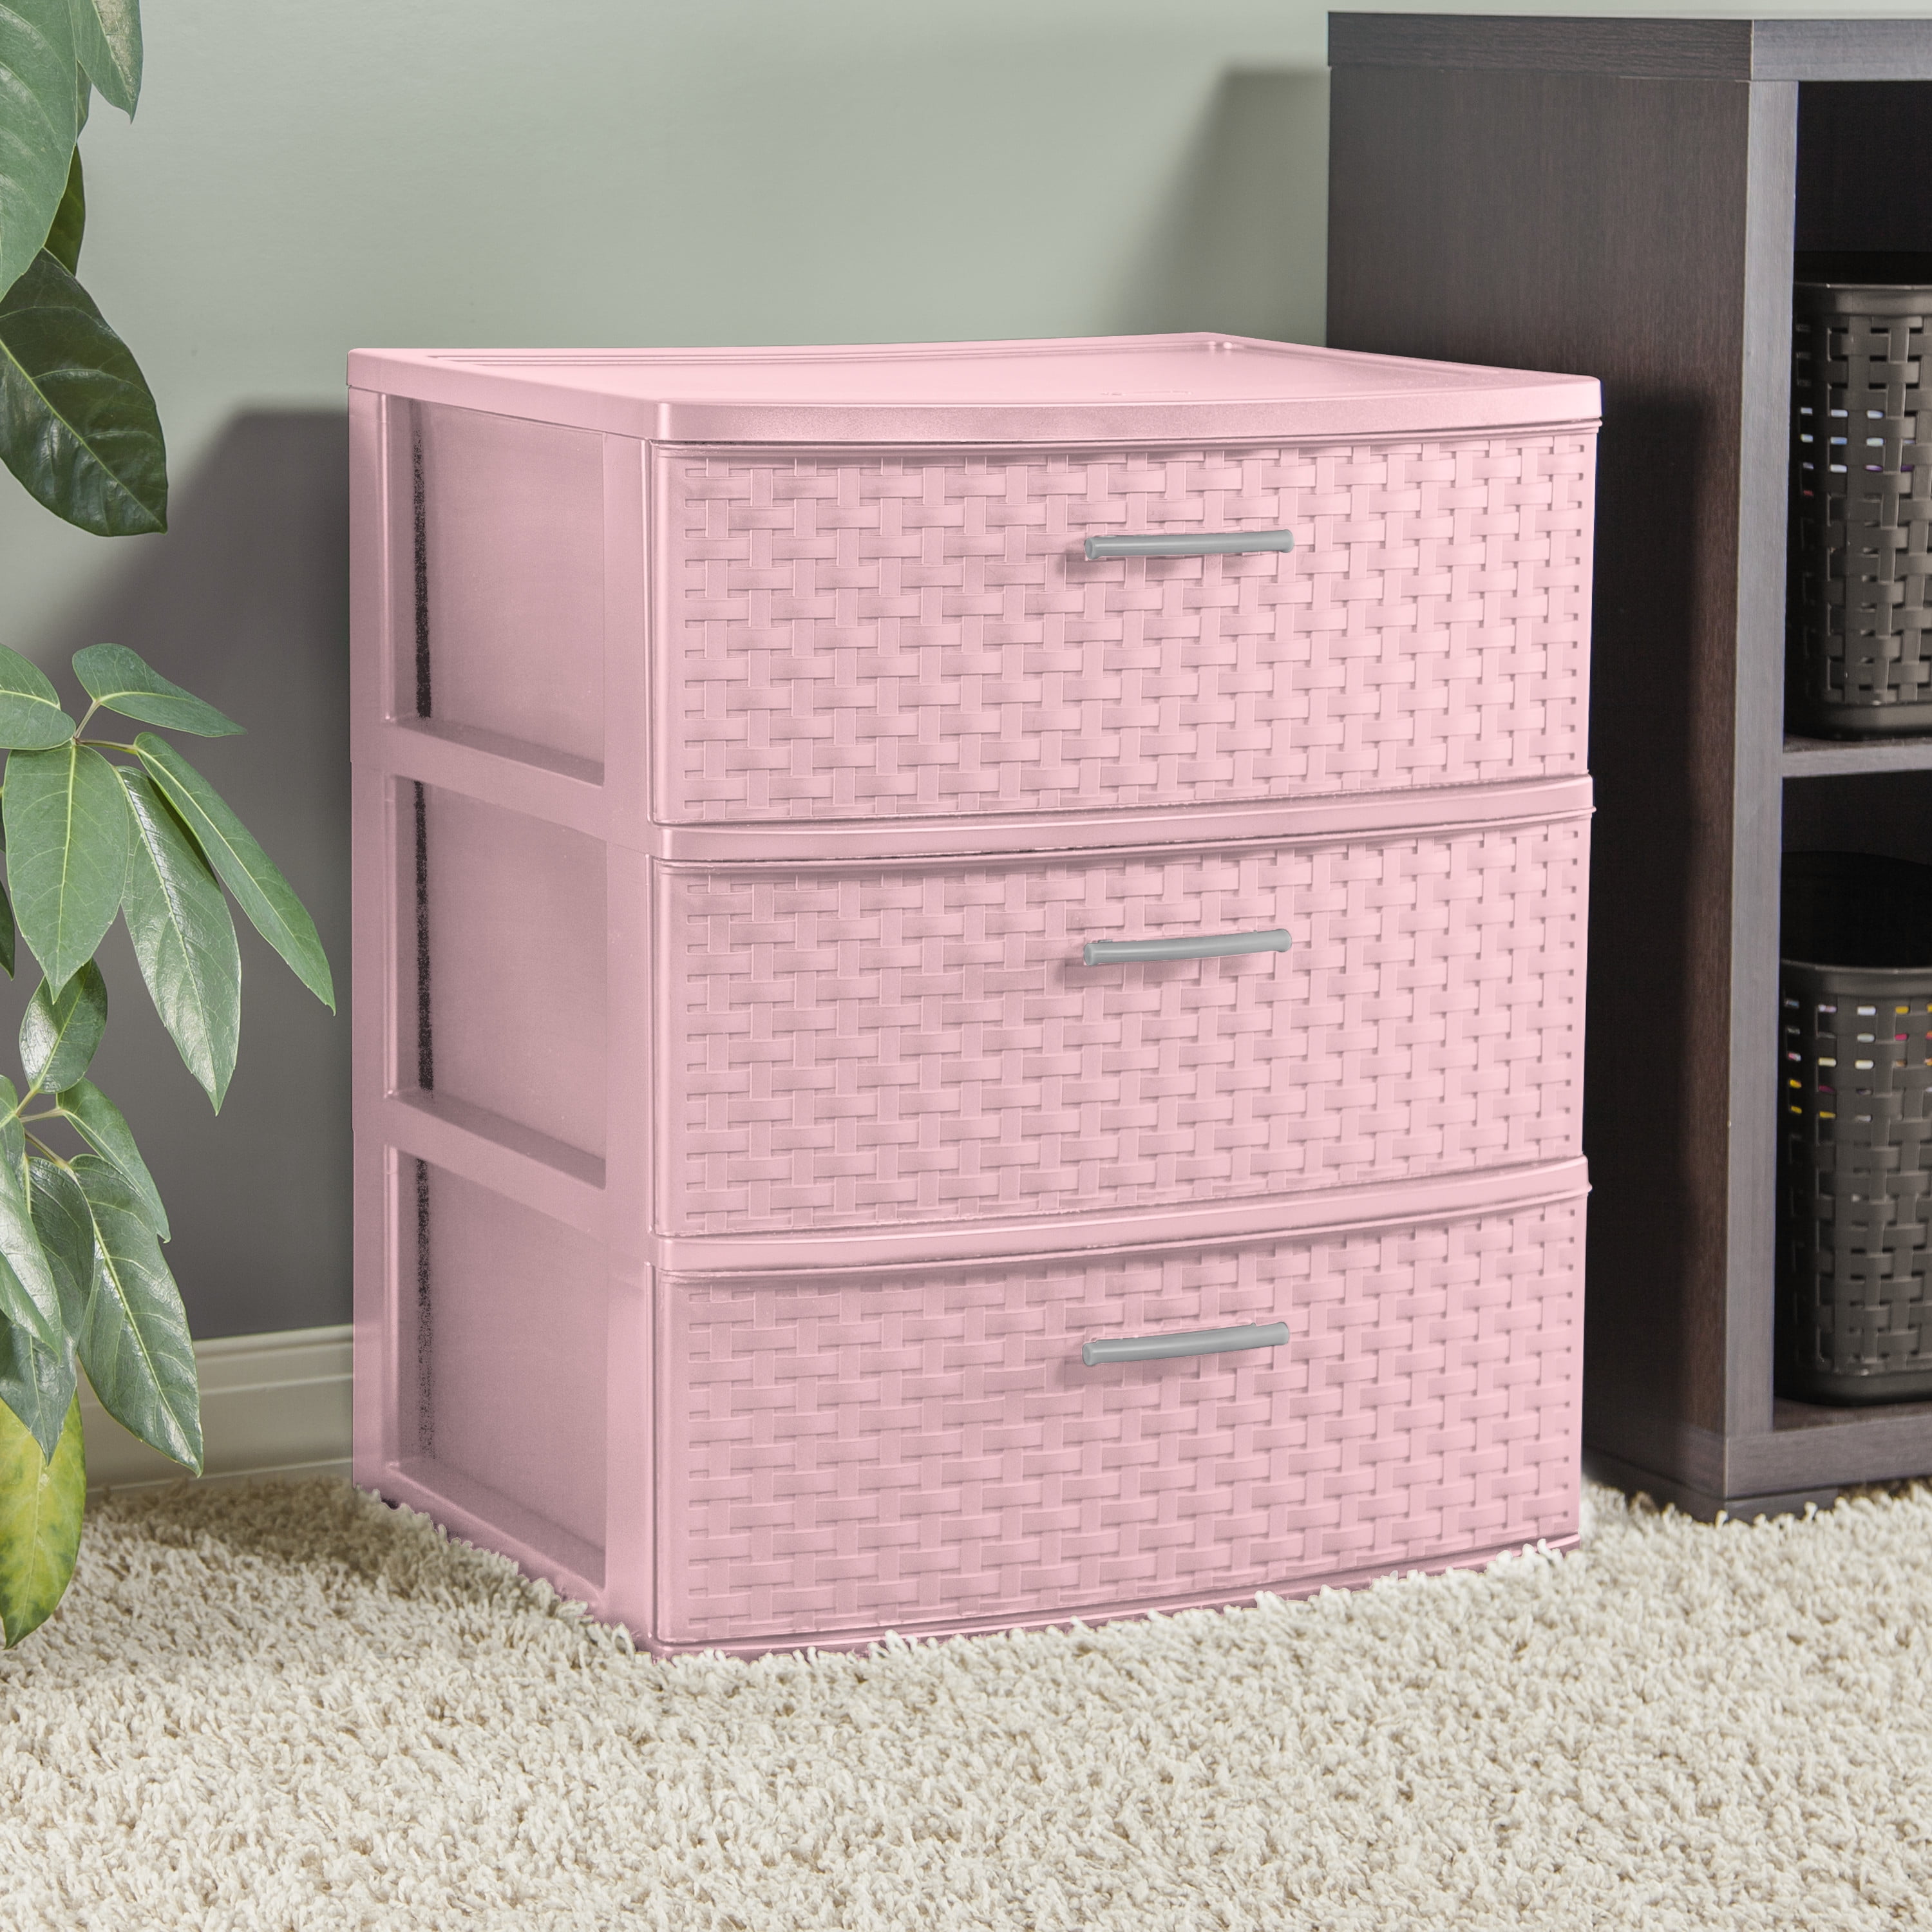 TONTARELLI 3 Drawer Tower with Clear Drawers Color Blush 